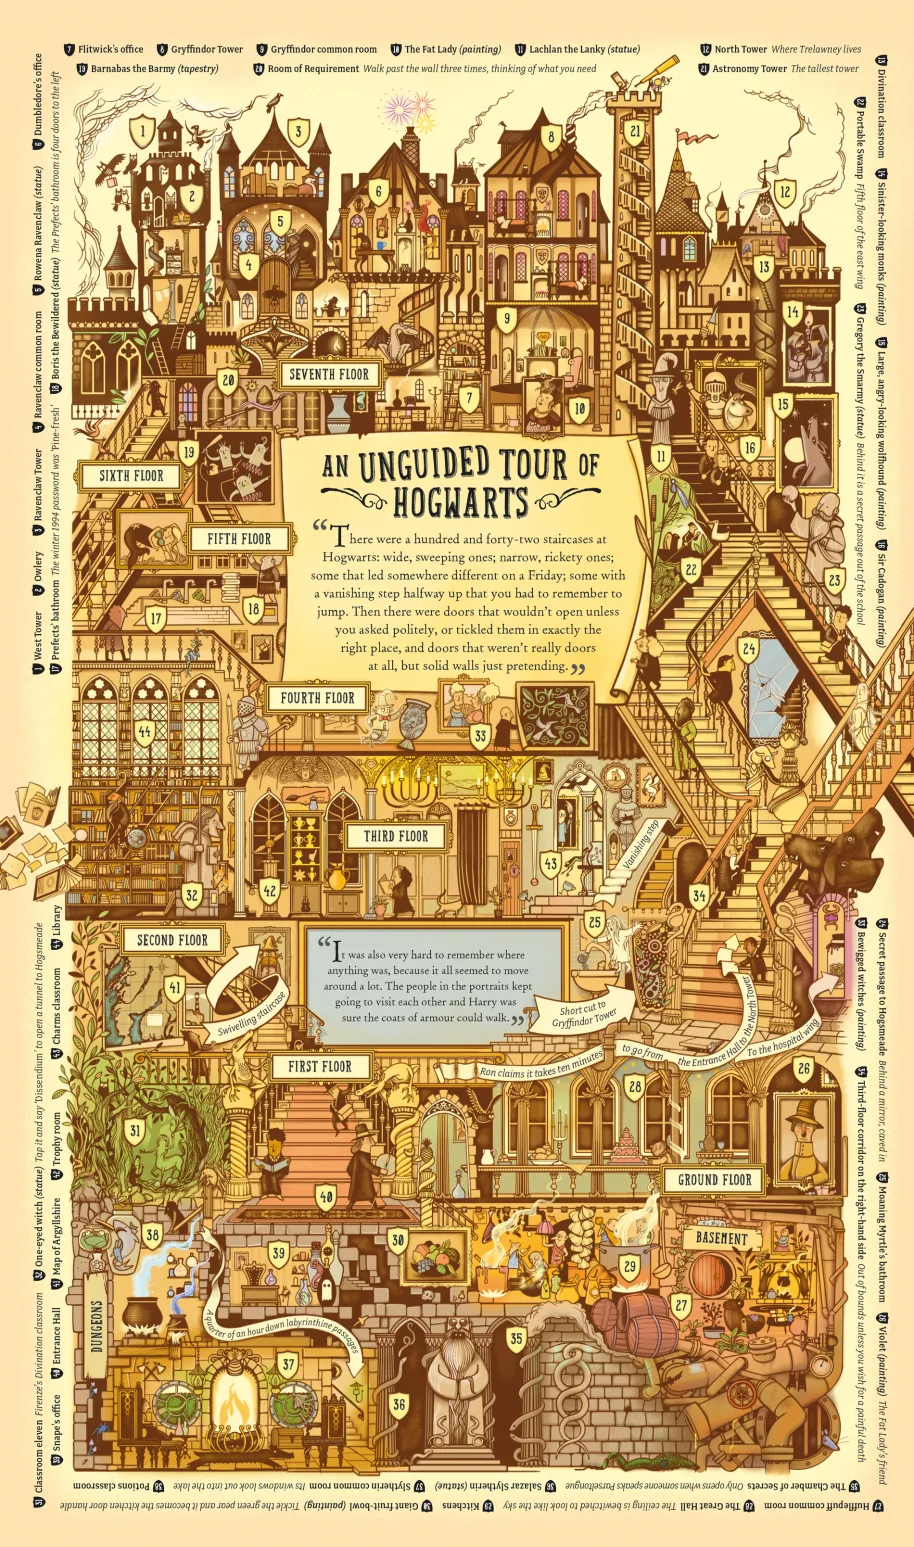 "The Harry Potter Wizarding Almanac" spread showing a stylized interior map of Hogwarts